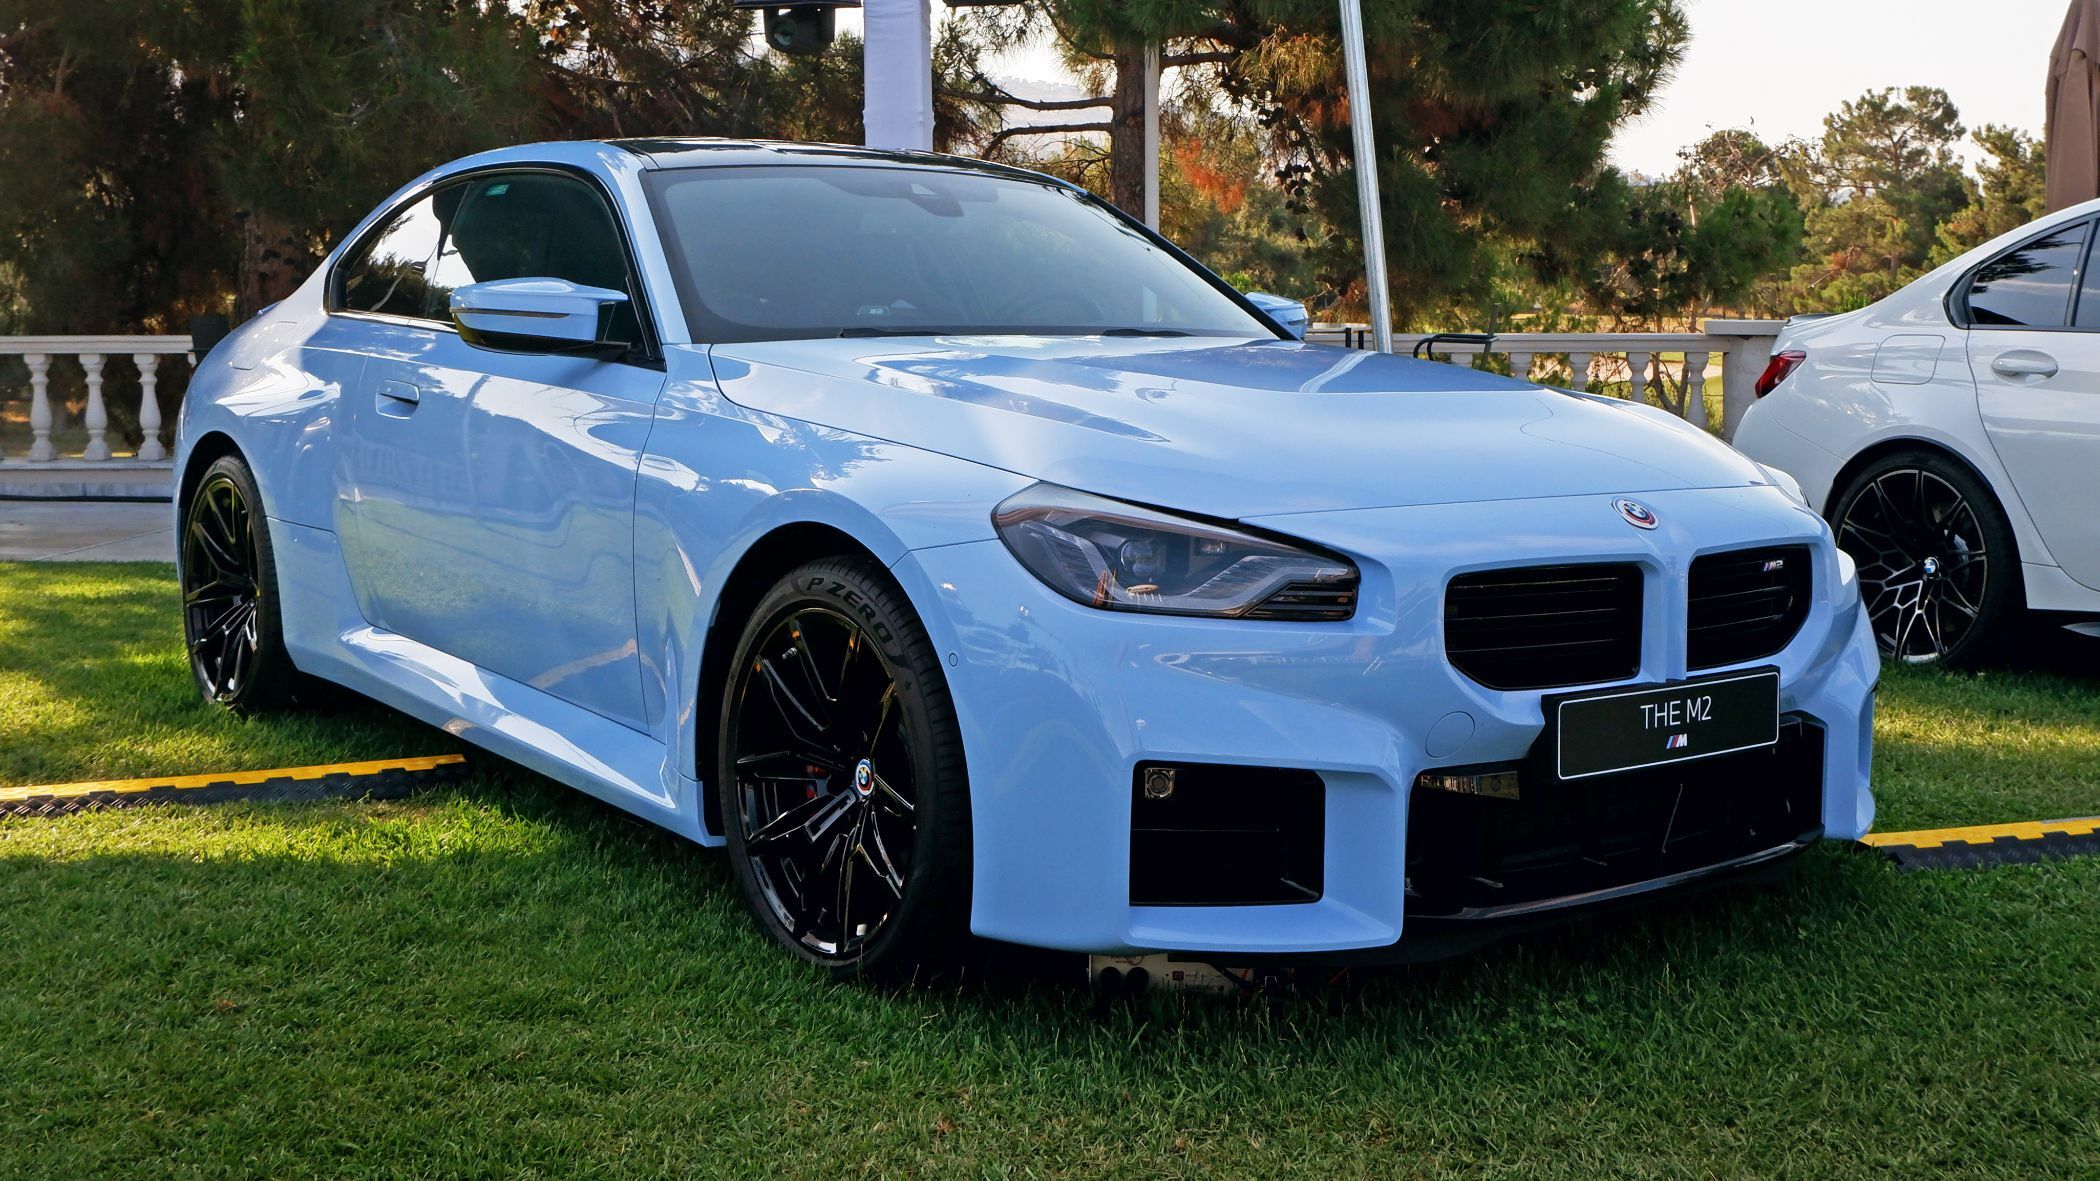 5 Reasons Why The BMW M2 Could Be The Best M Car Despite Not Being